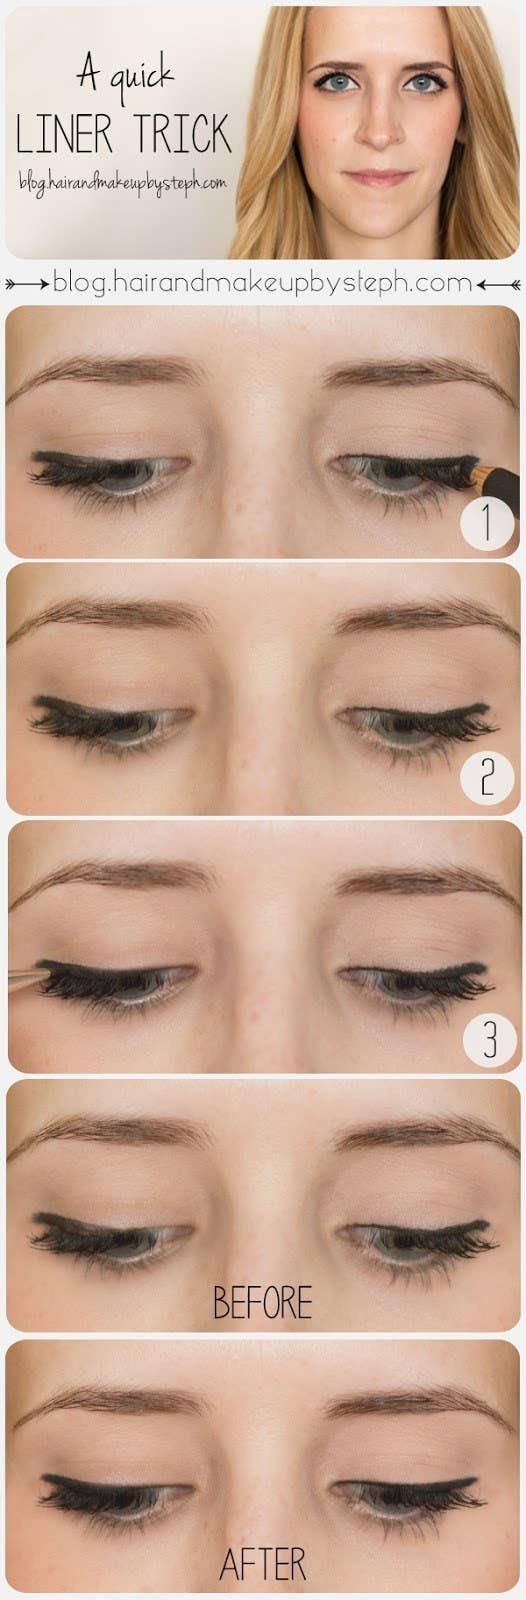 how to apply eyeliner step by step